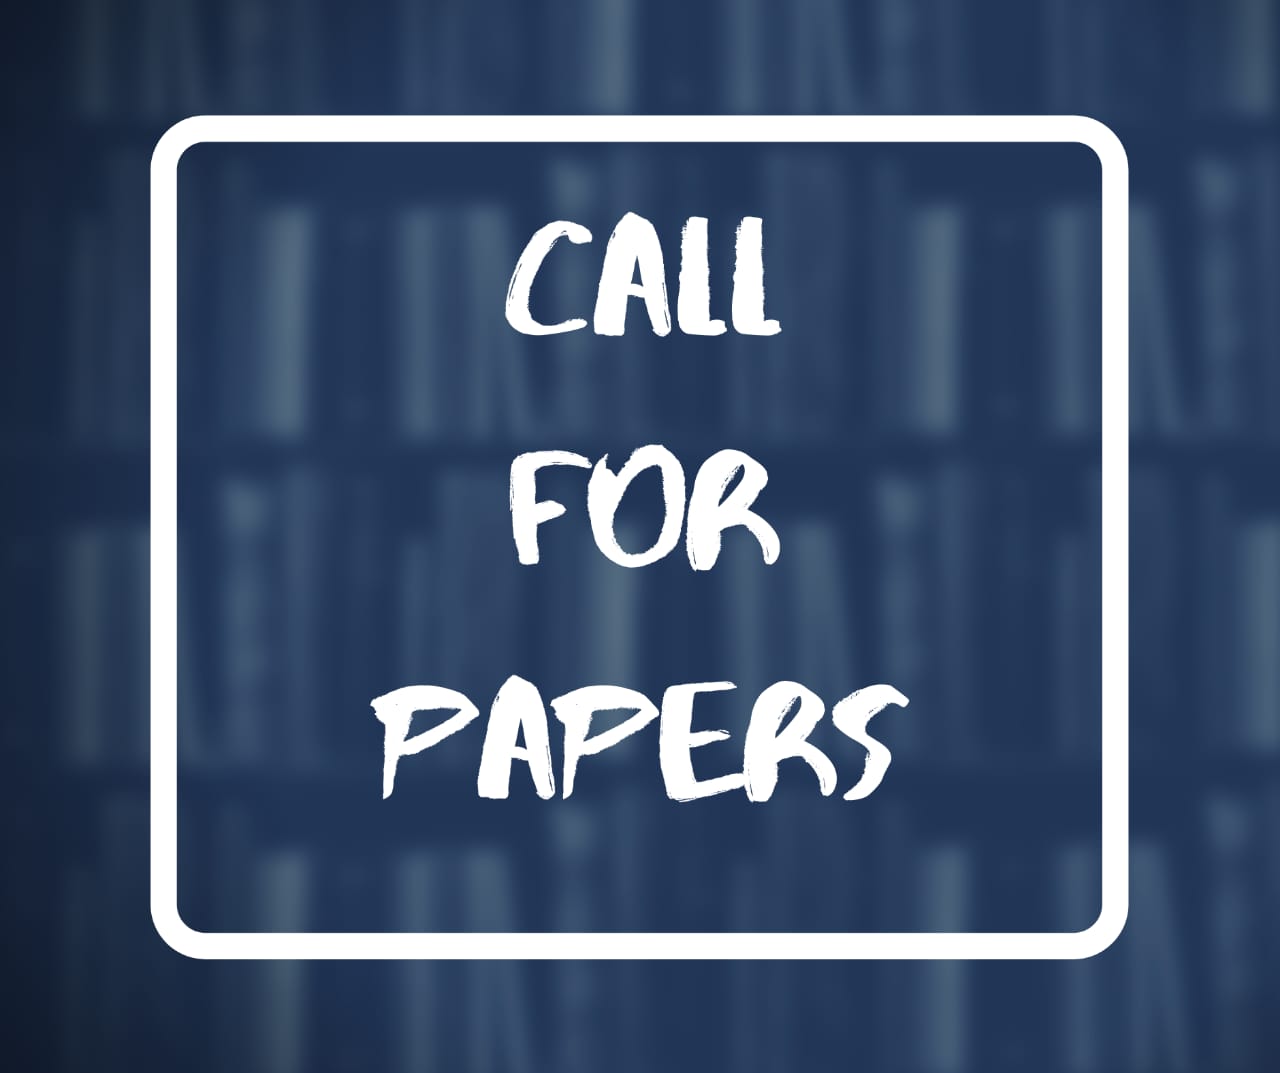 Call for Papers! GTGC Workshop! The Promise and Perils of Human Rights for Governing Digital Platforms!